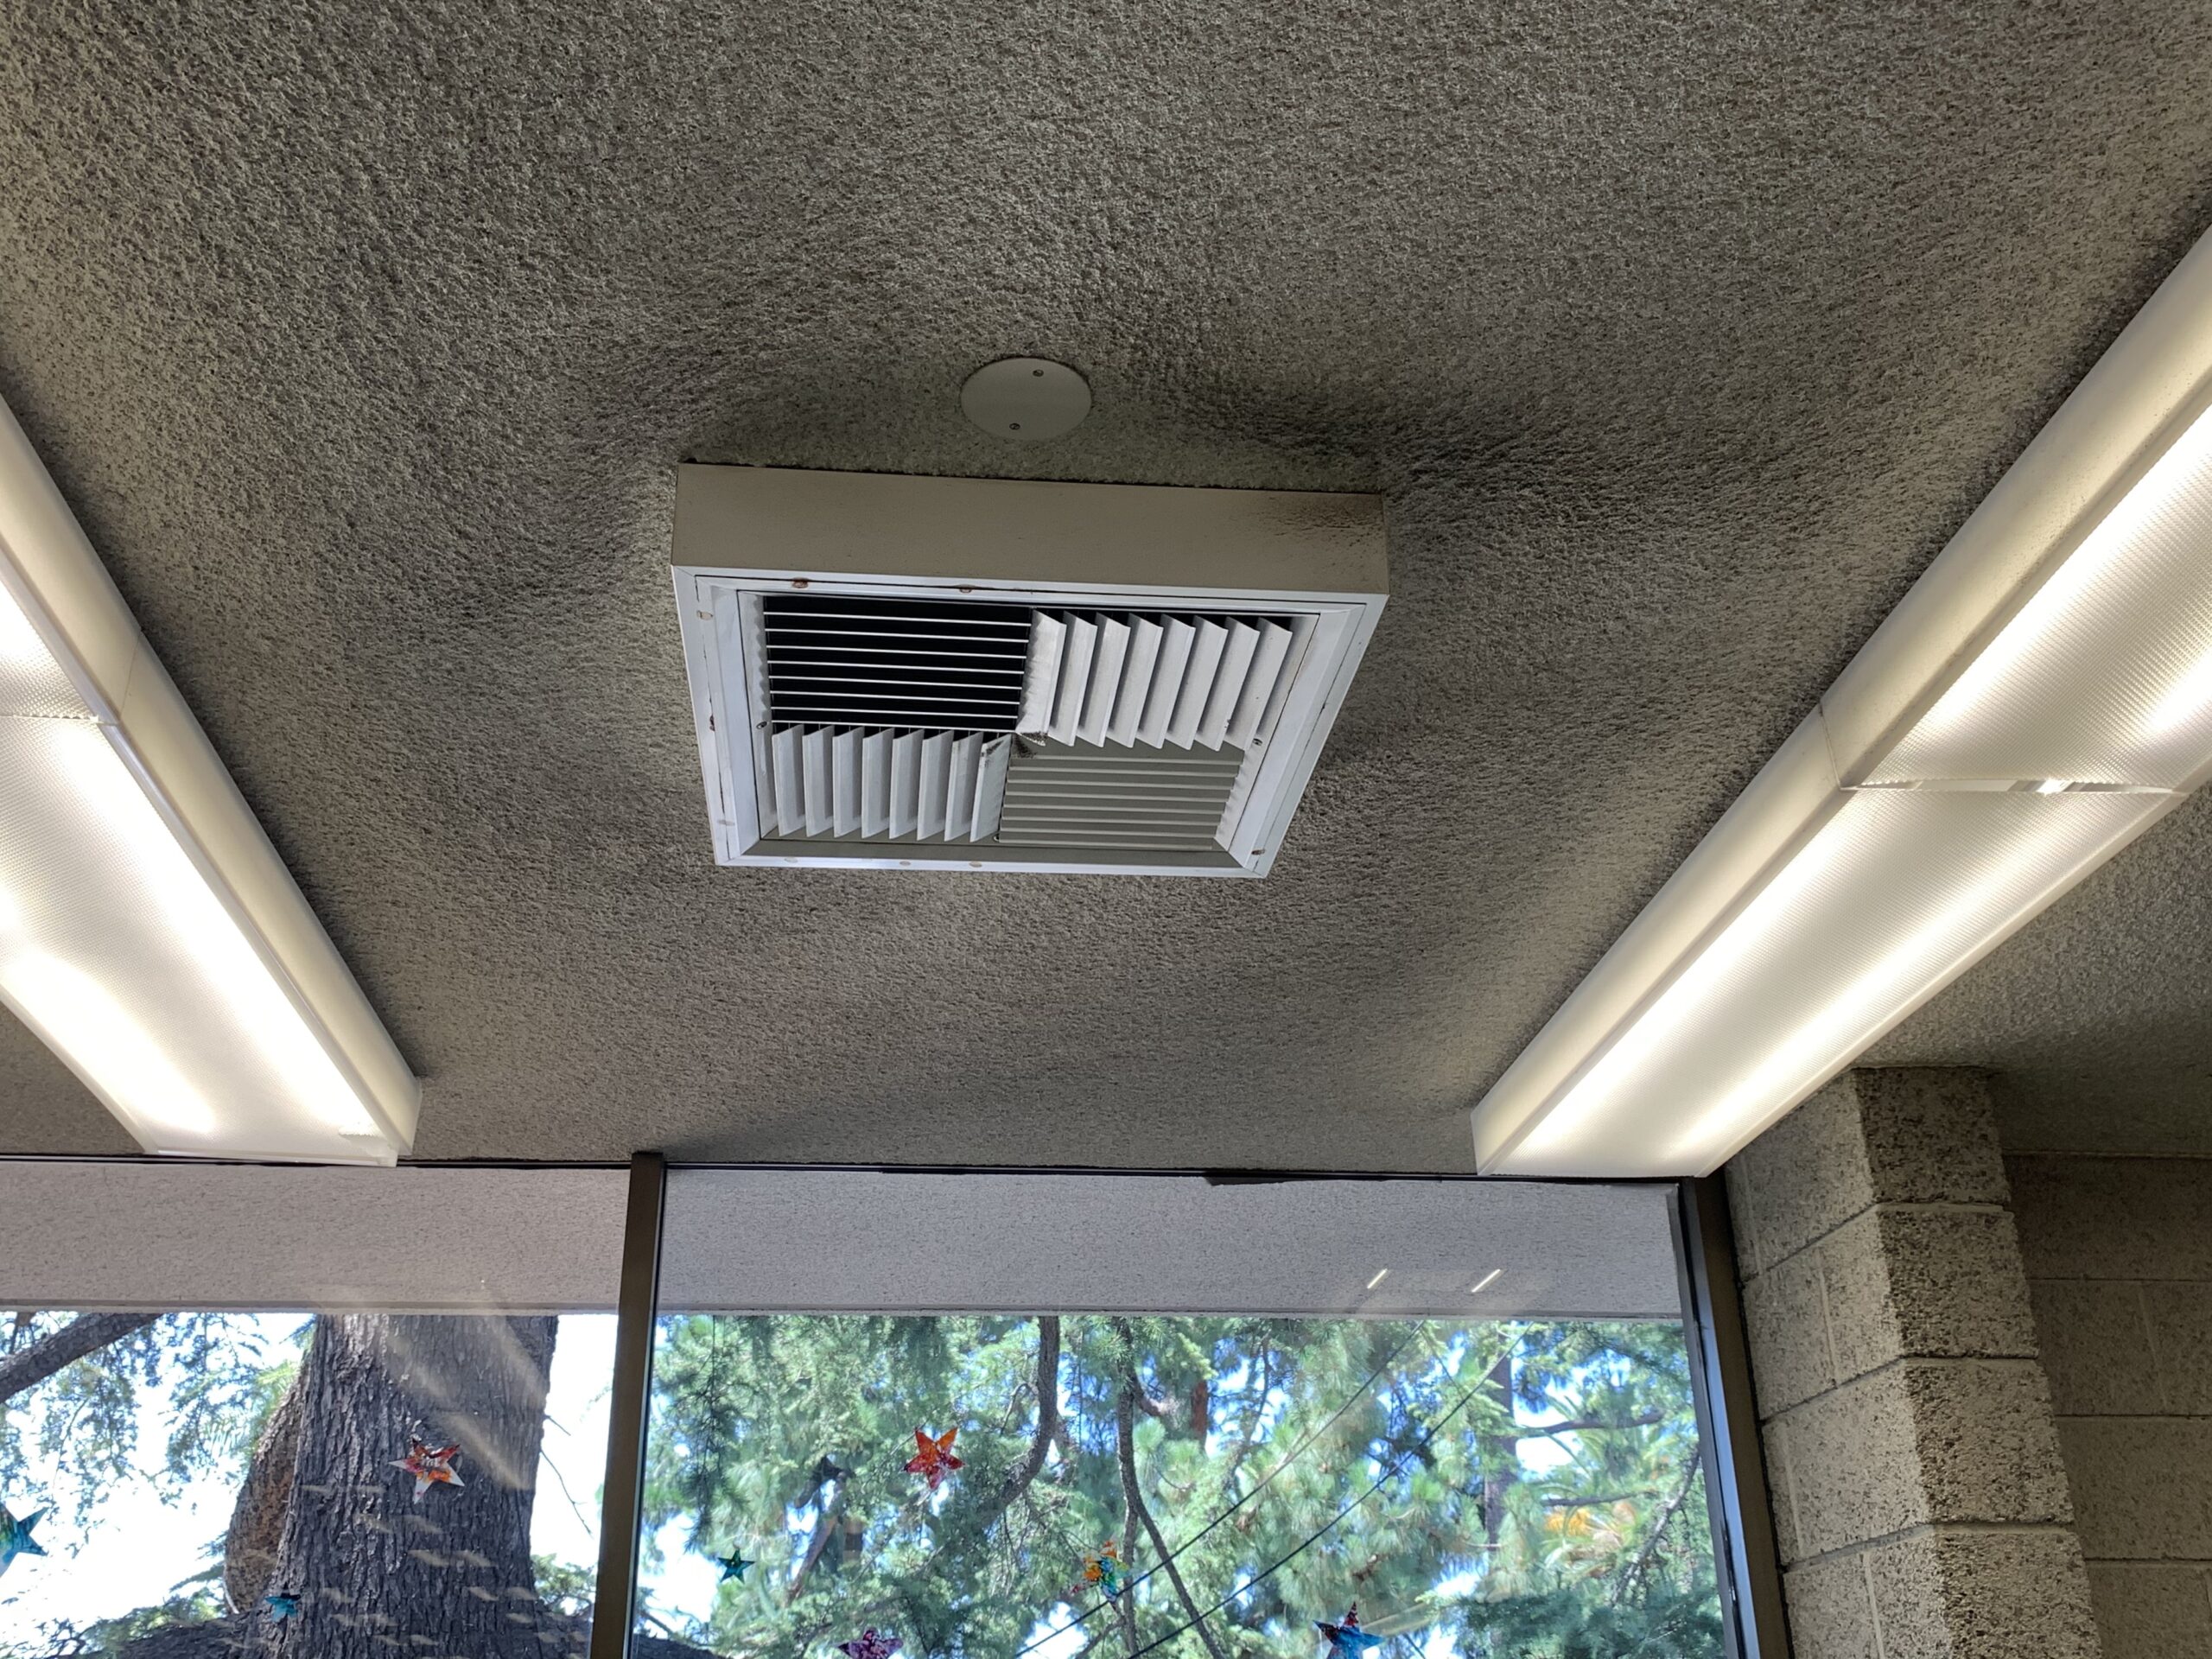 Damage and buildup from deferred maintenance of air ducts